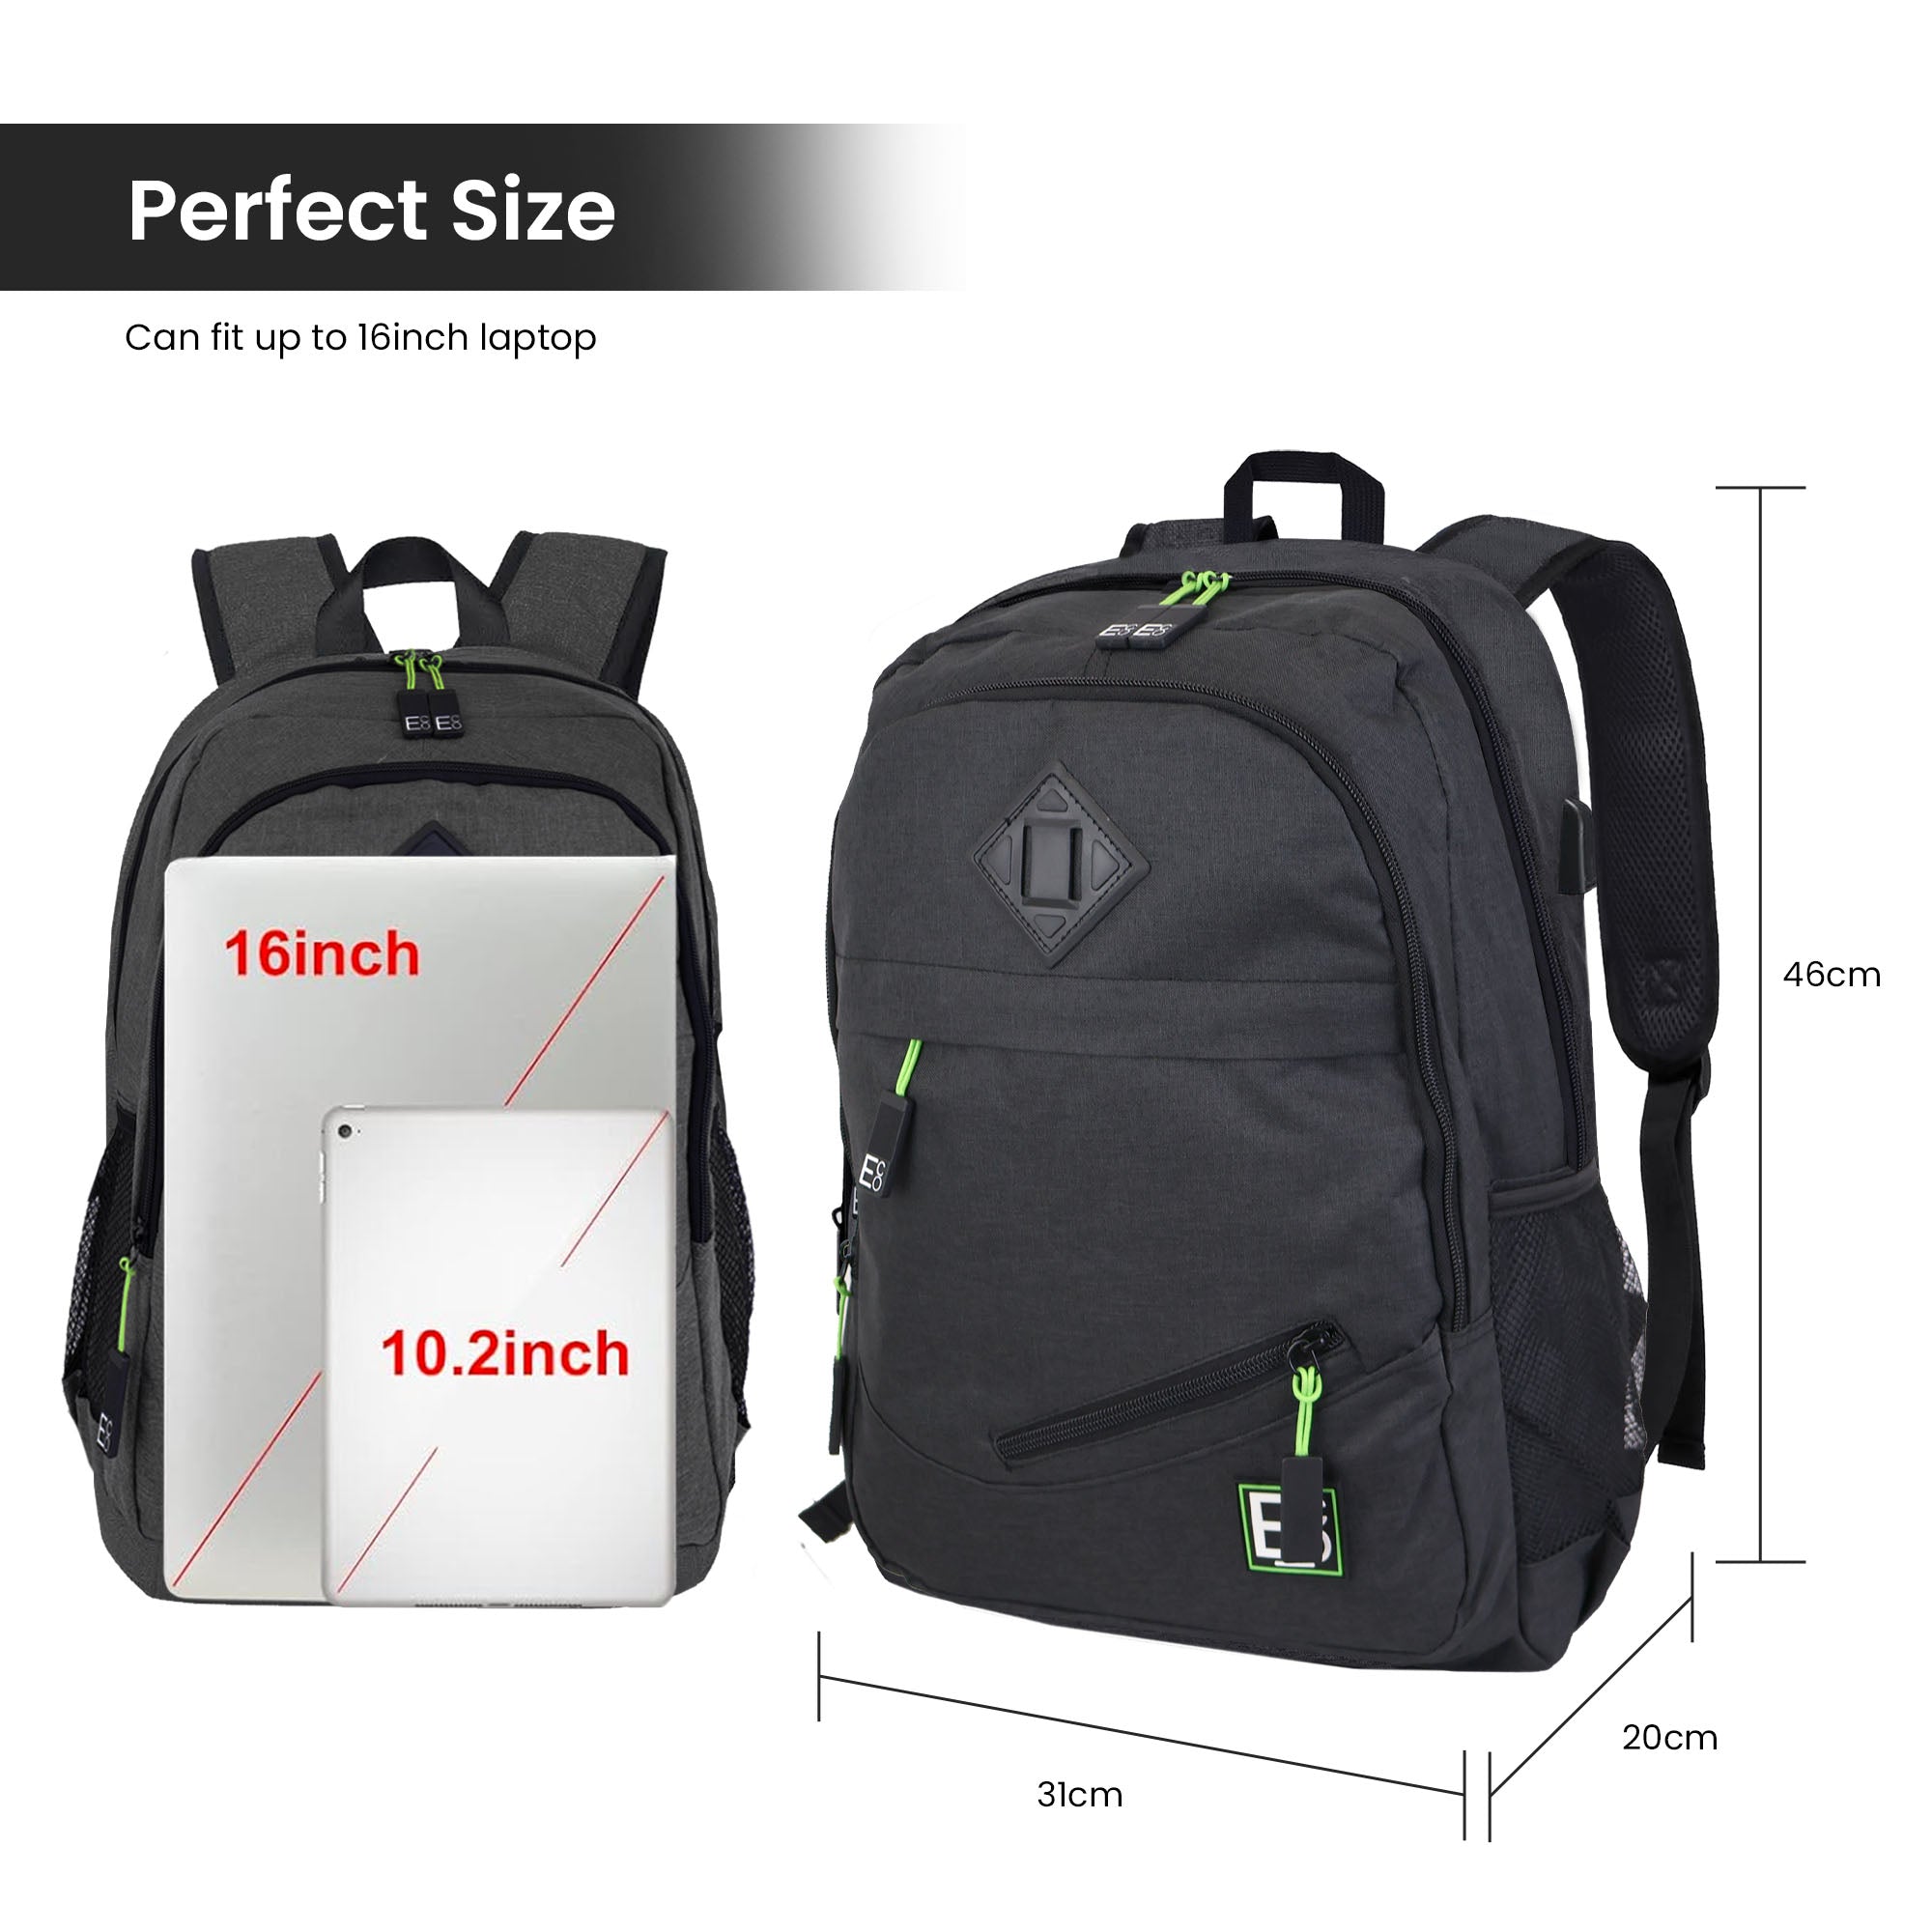 Backpack with USB Laptop or Phone Charging Port